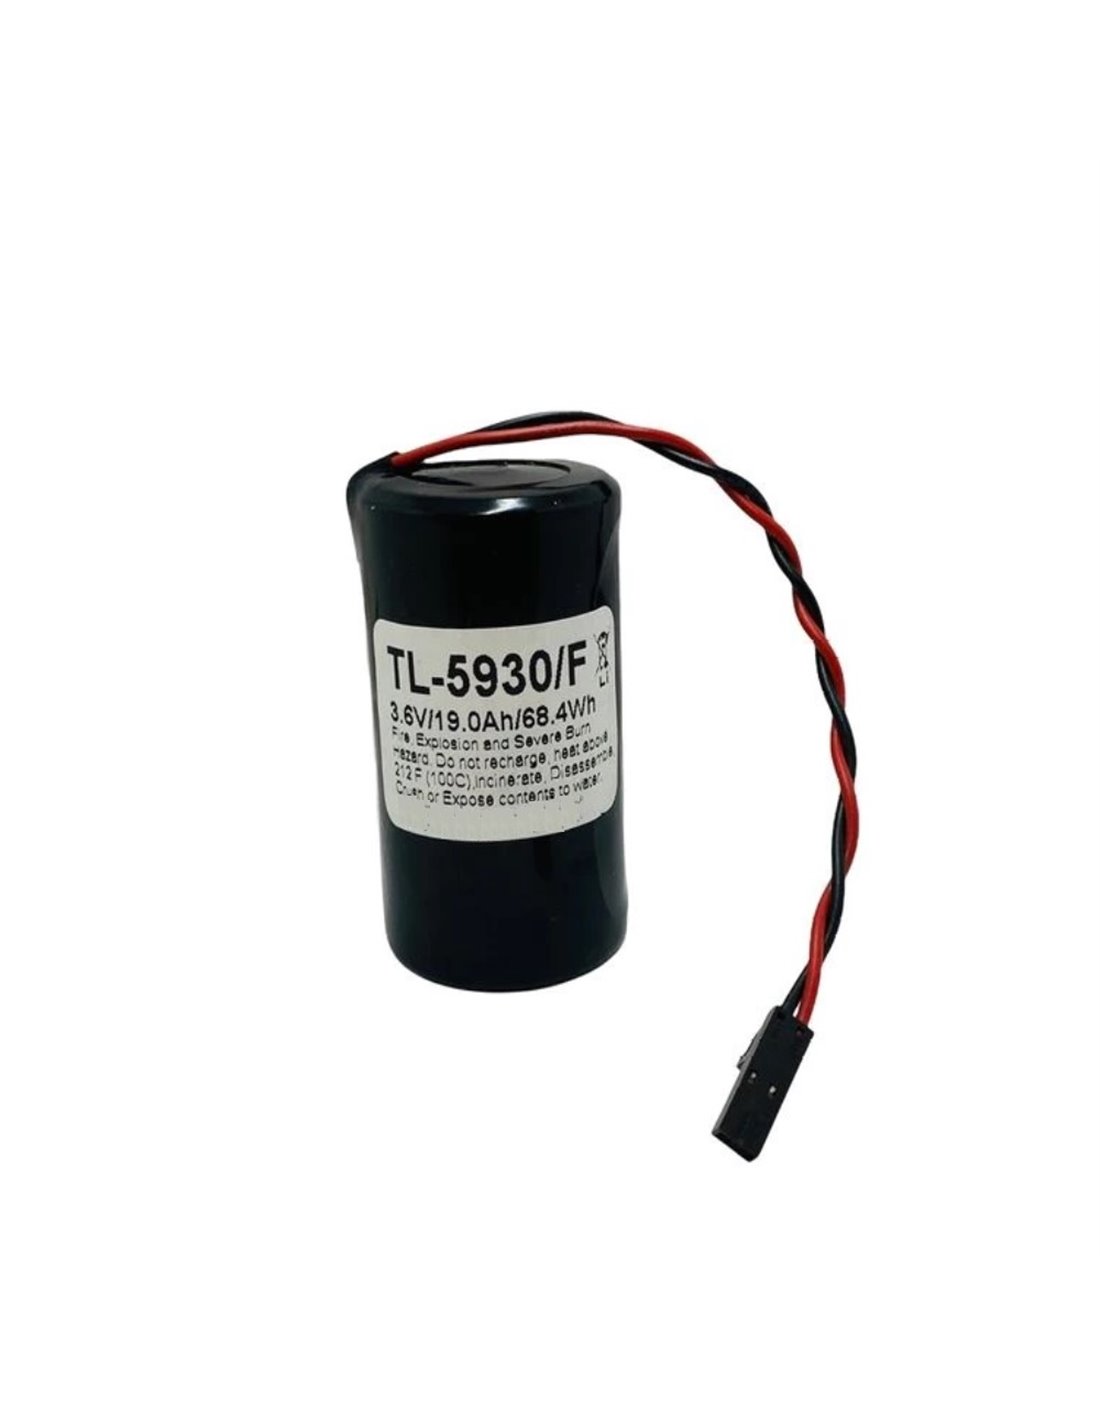 Tadiran TL-5930/F 3.6V D Size 19Ah Lithium Battery with lead & connector - Non Rechargeable